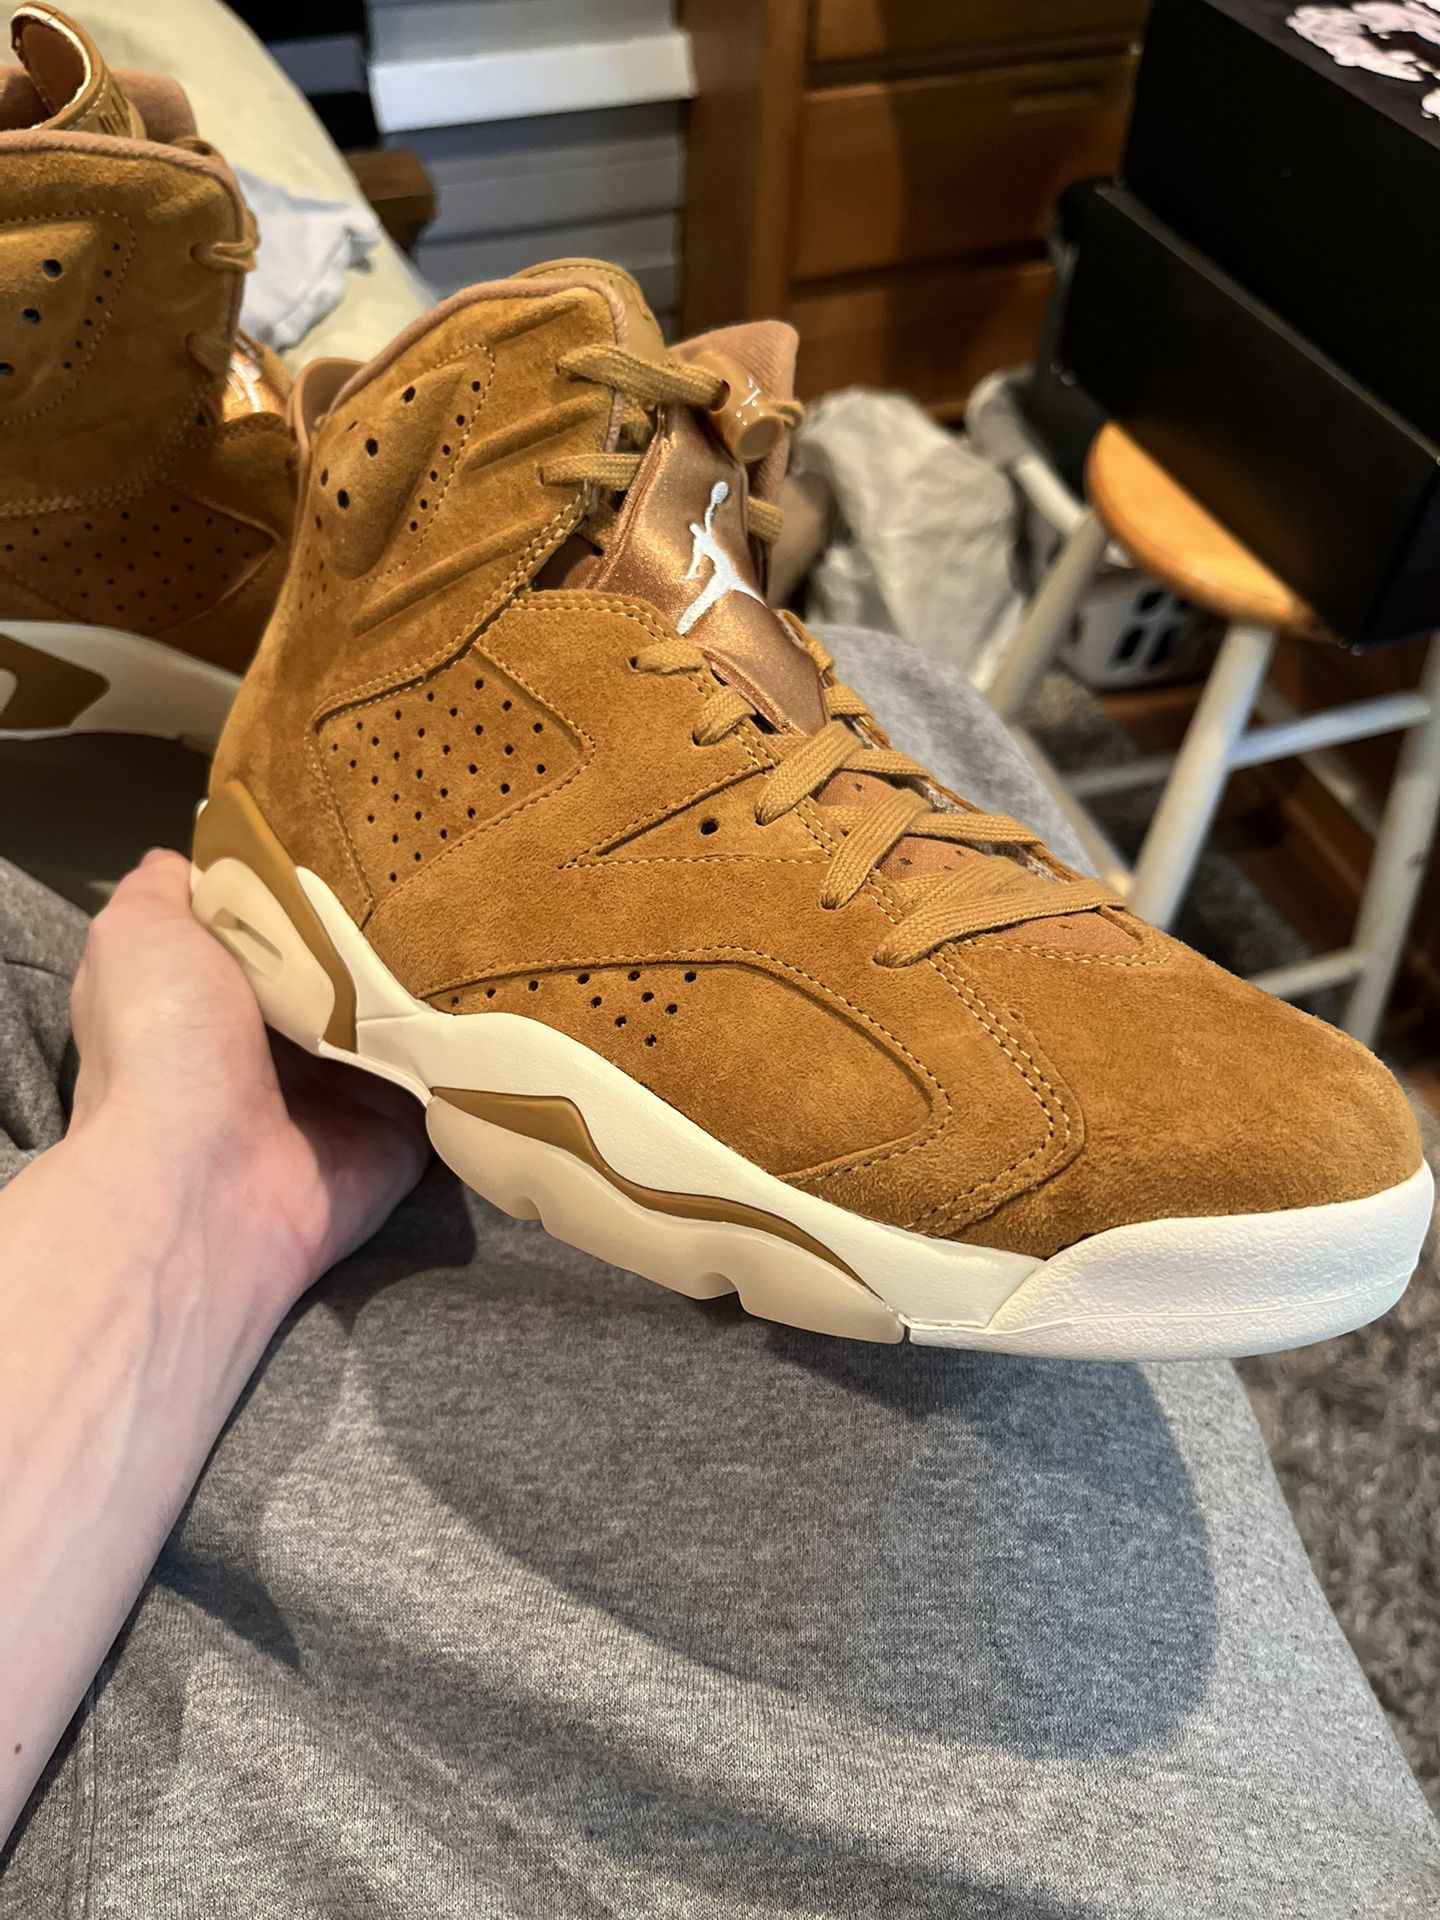 Air Jordan 6 Retro Wheat Size 11.5 for Sale in Northport, NY - OfferUp